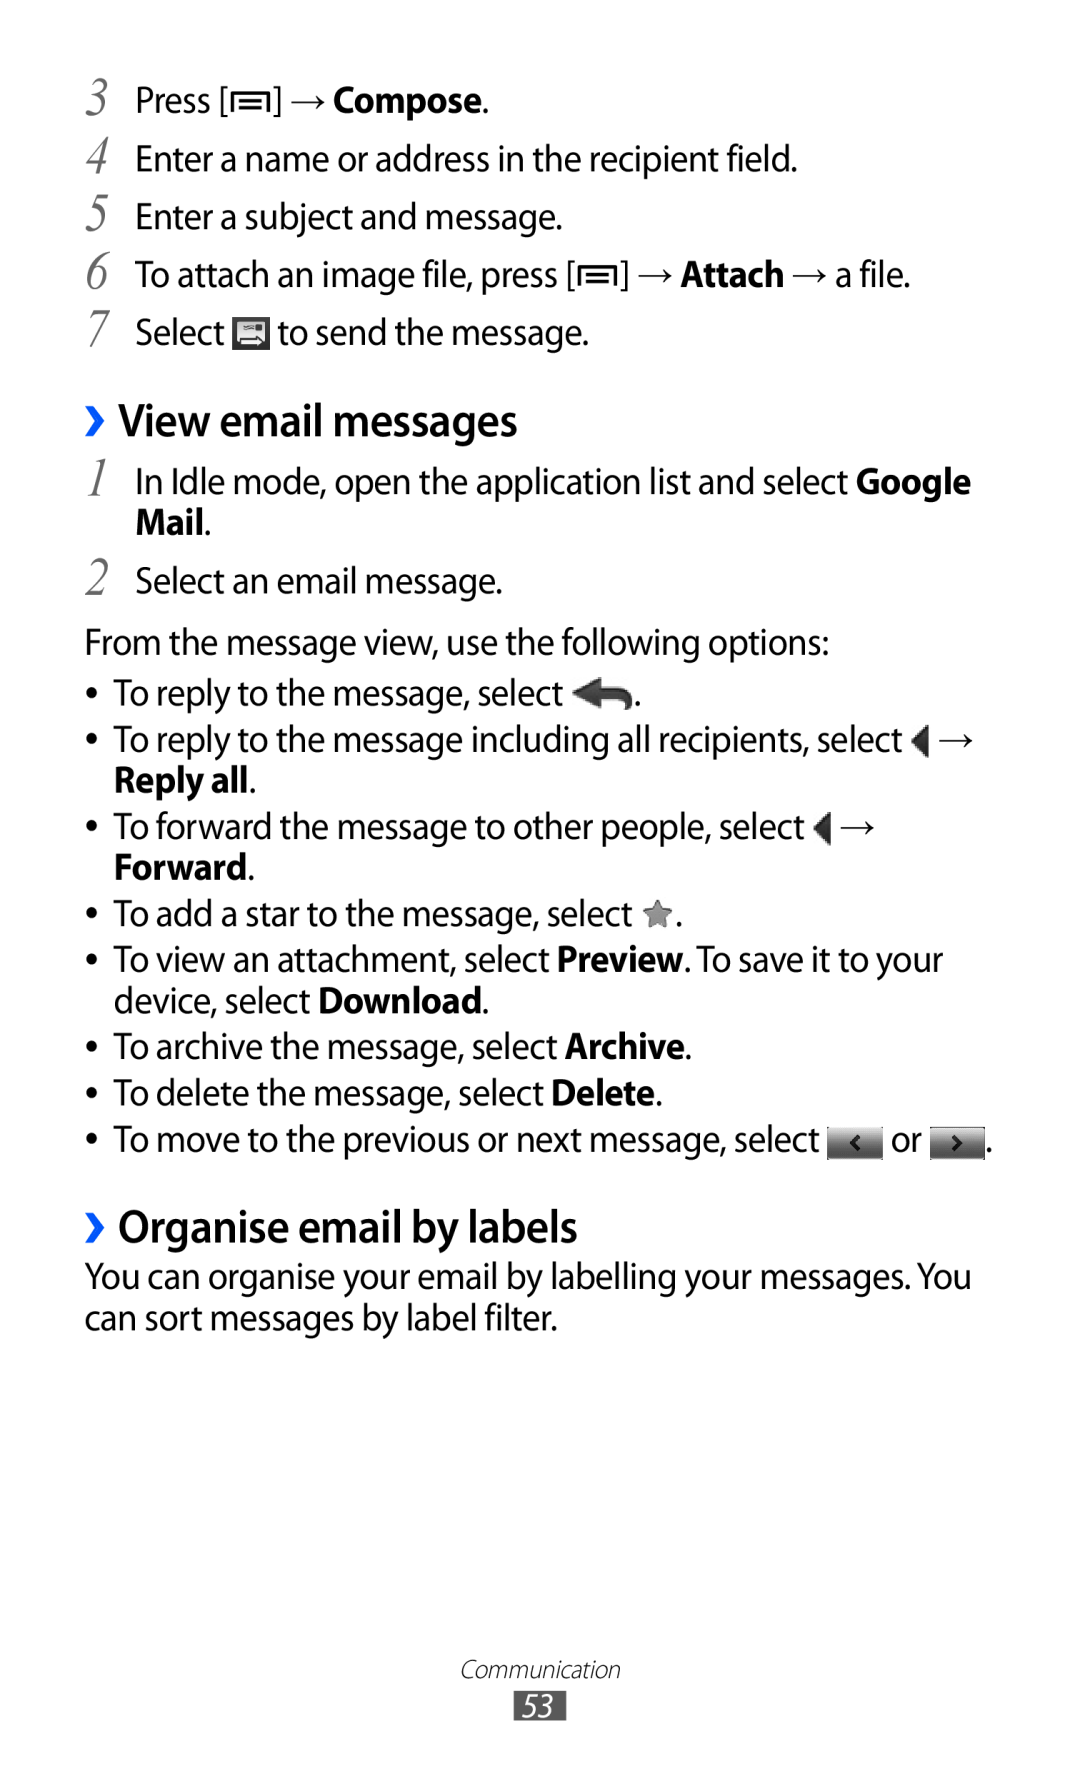 Samsung GT-I9070 user manual ››View email messages, ››Organise email by labels, Mail, Forward 